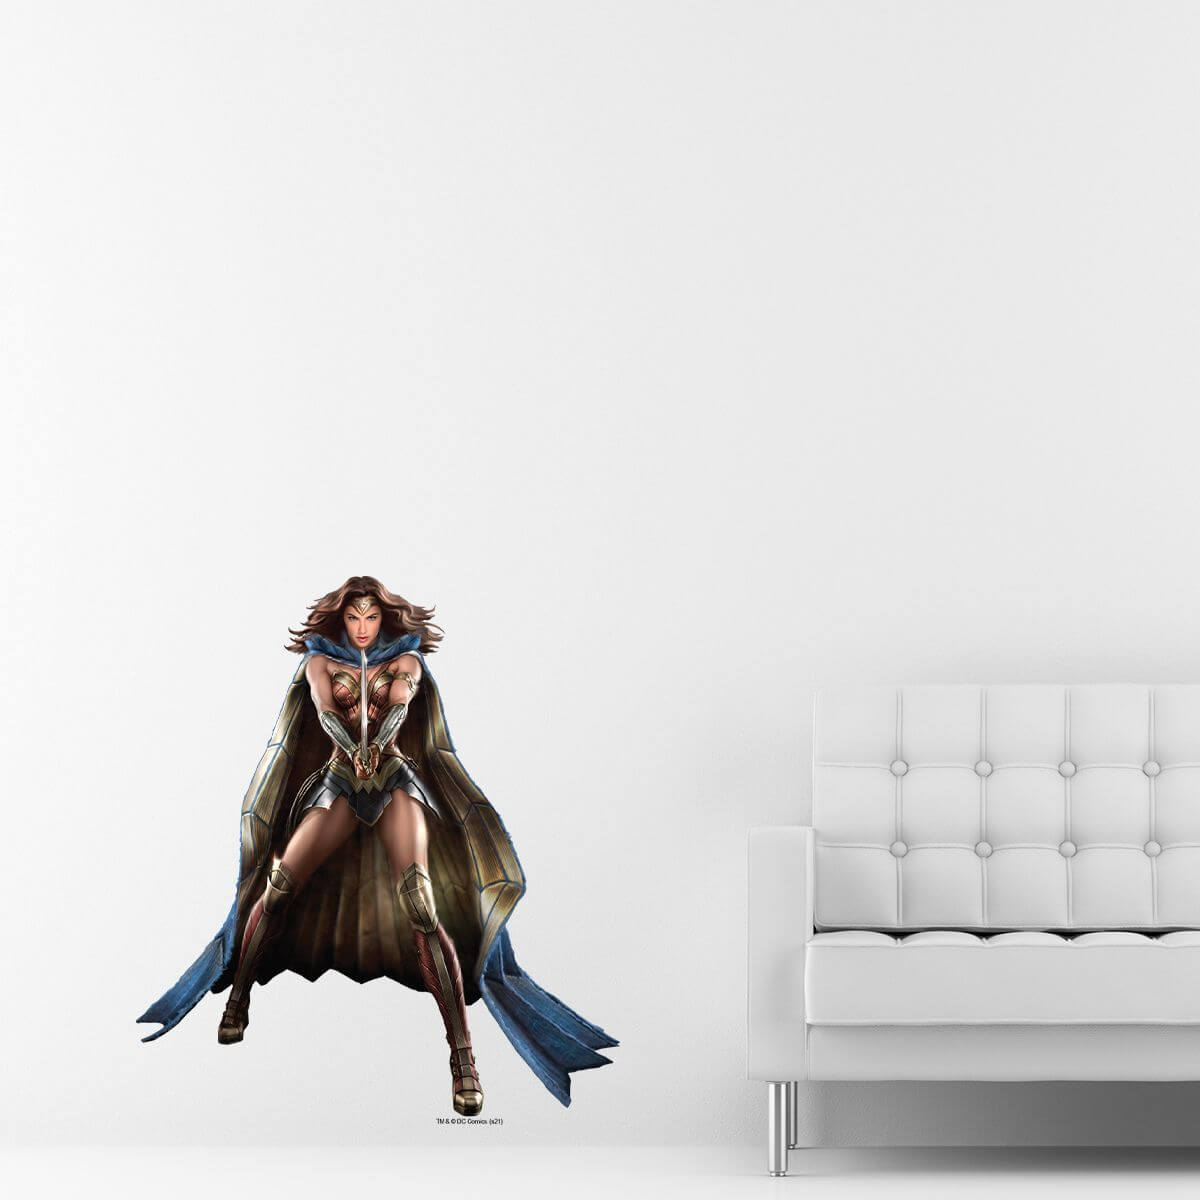 Kismet Decals Caped Wonder Woman Licensed Wall Sticker - Easy DIY Justice League Home & Room Decor Wall Art - Kismet Decals